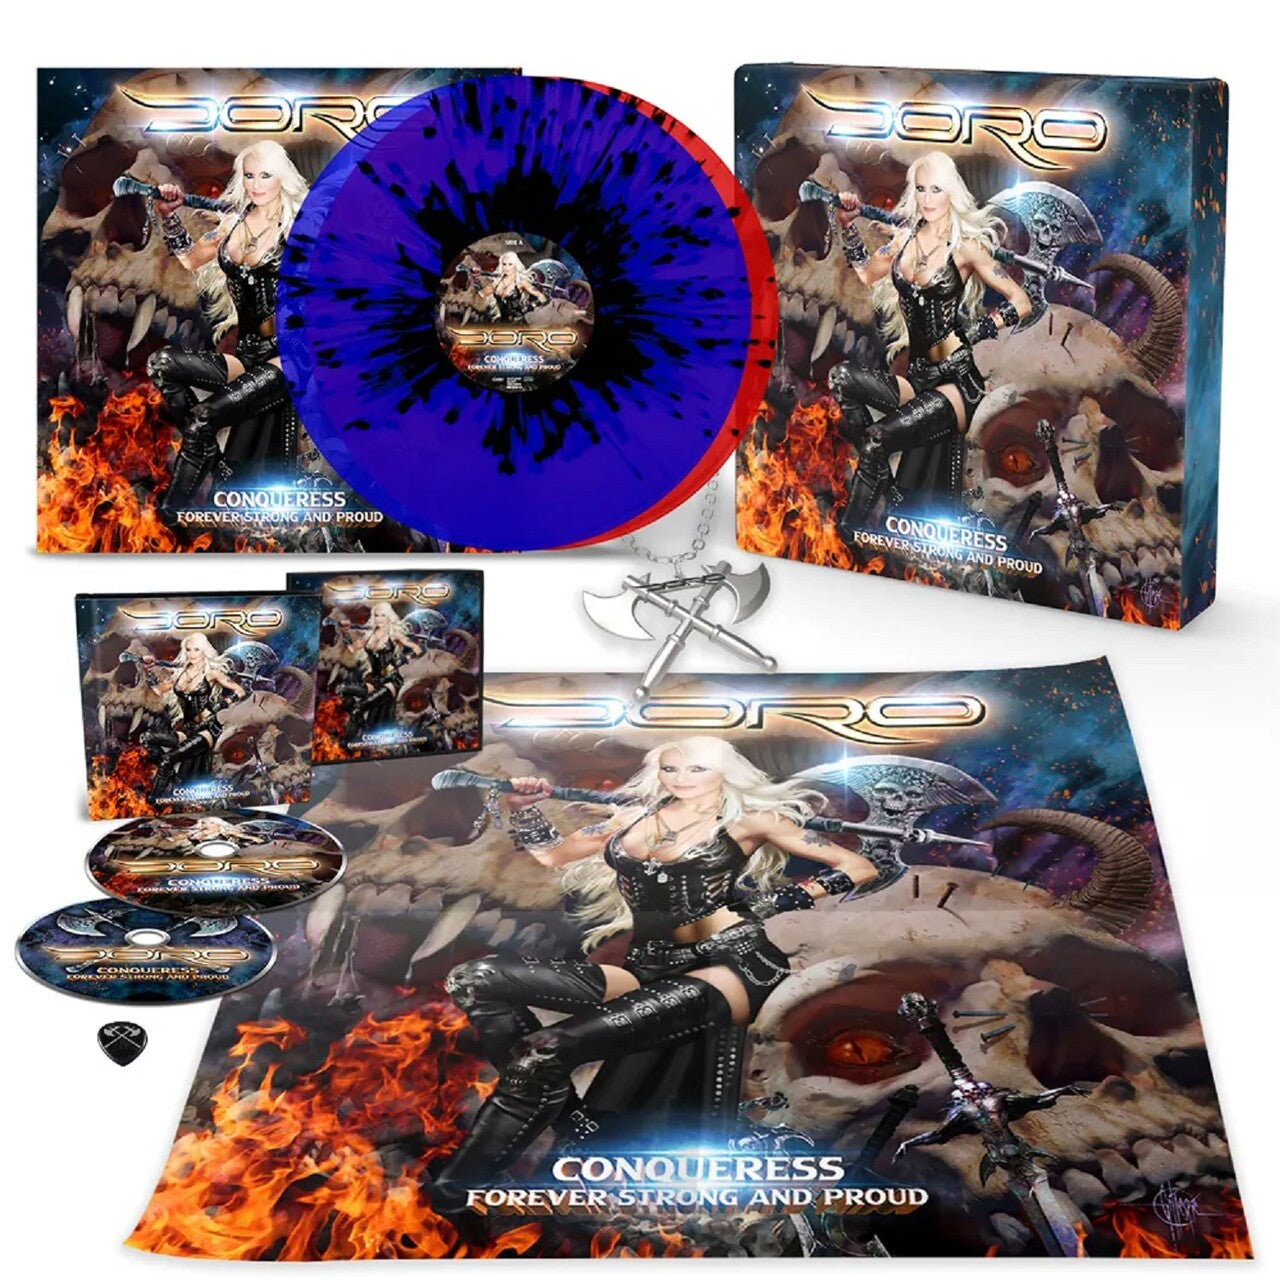 Doro - Conqueress - Forever Strong And Proud: Limited Edition Colour Vinyl Box Set